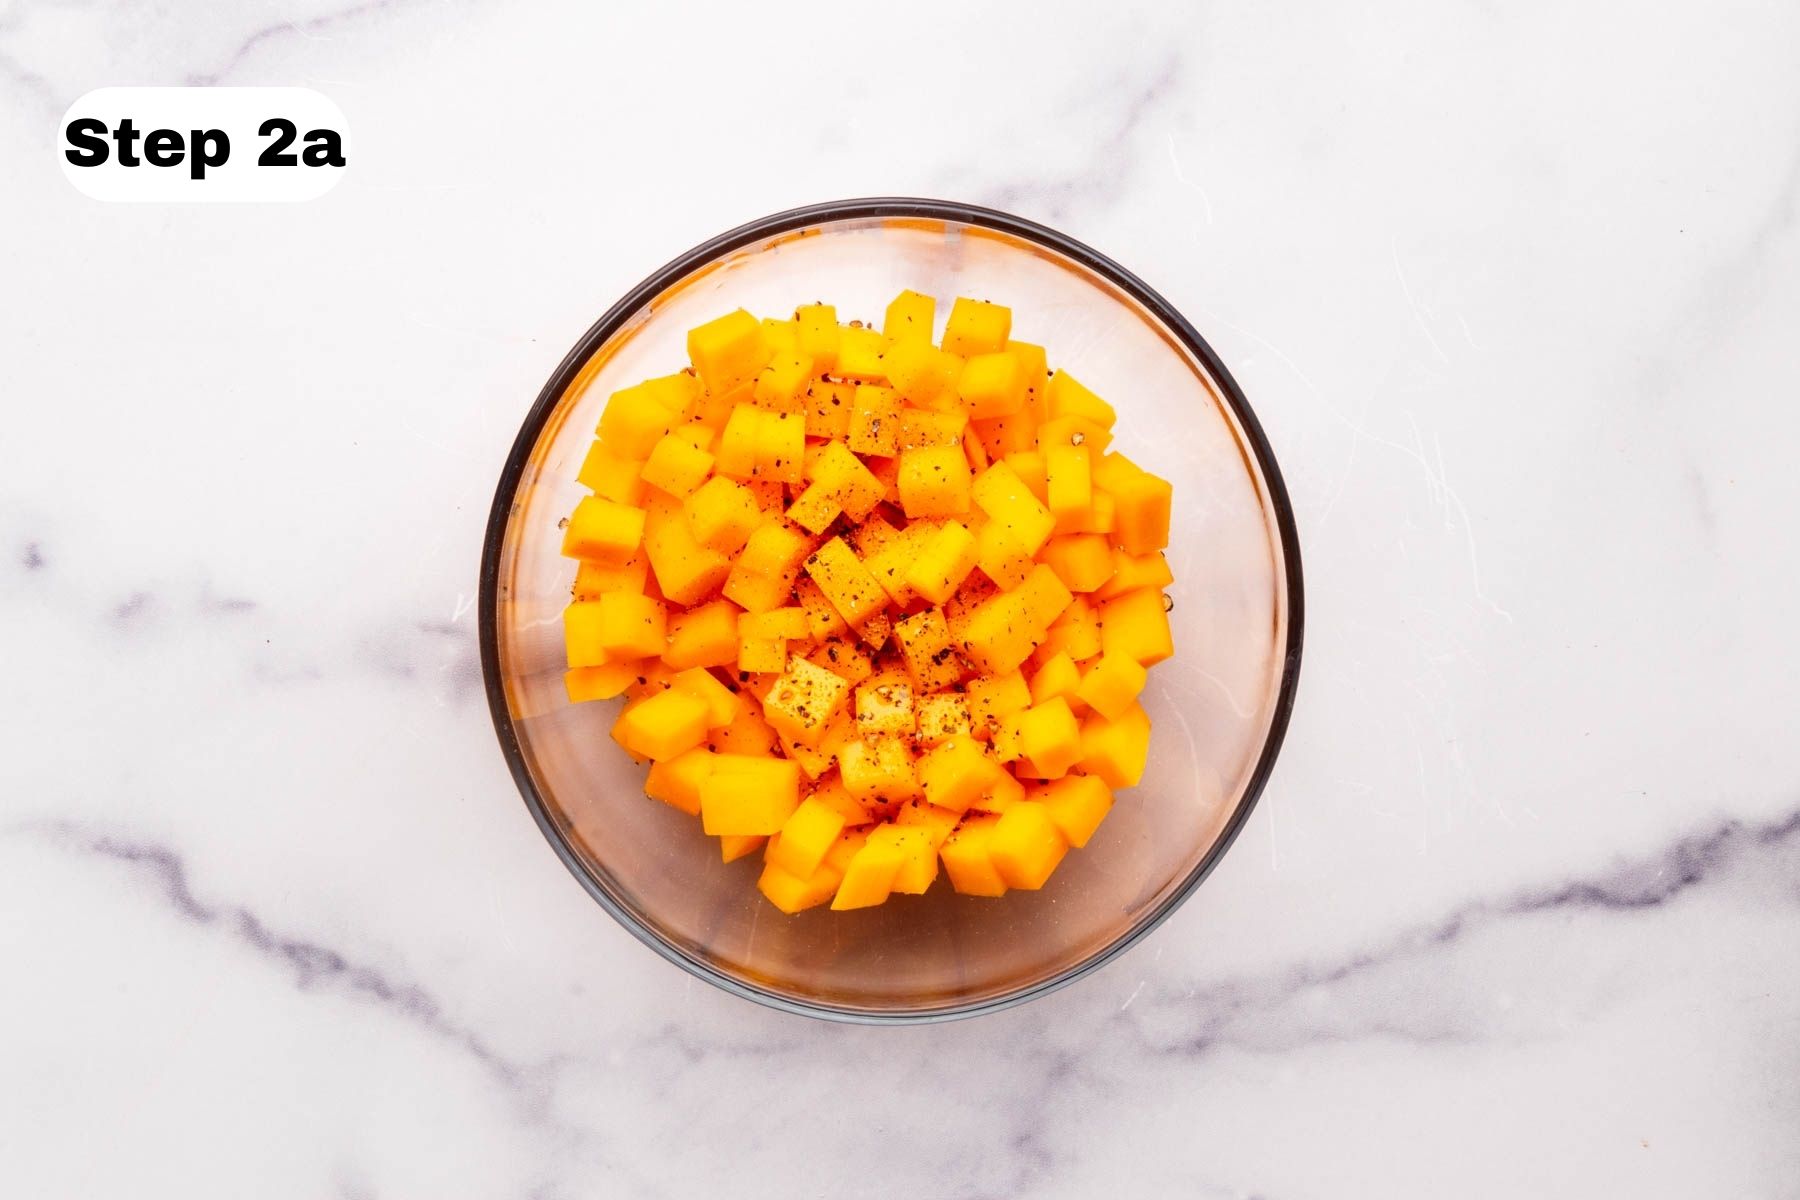 Diced butternut squash in a small glass bowl with olive oil, salt, and pepper